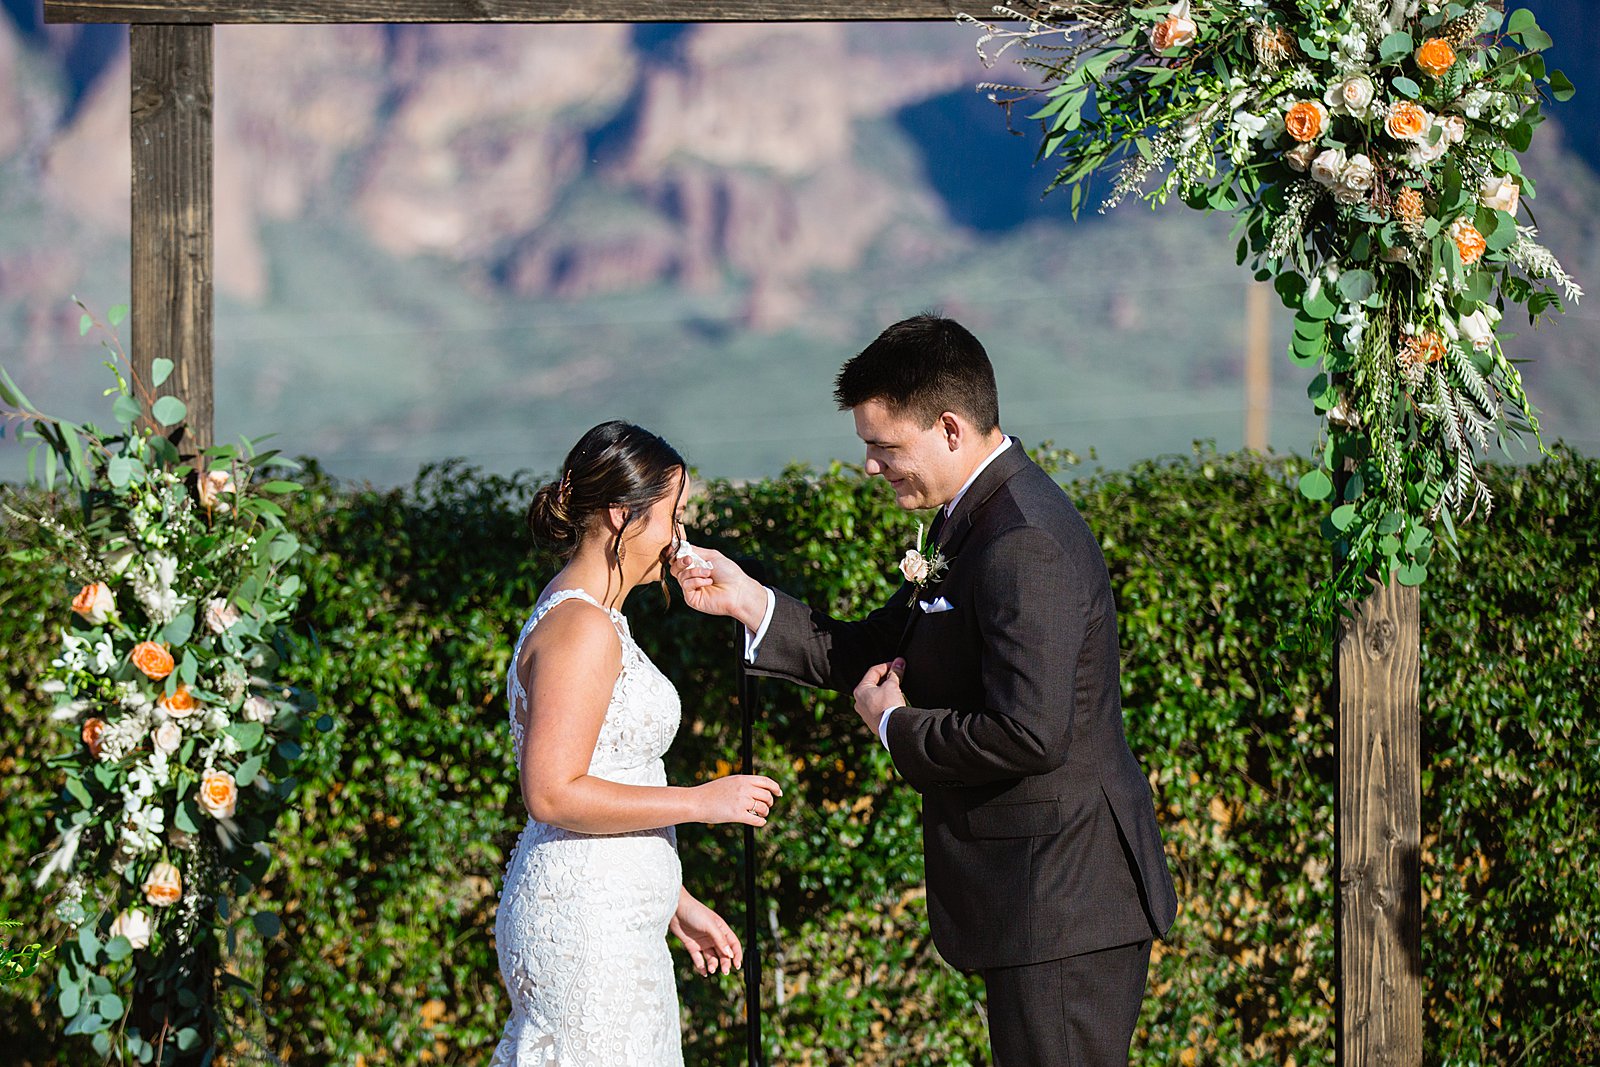 Groom wiping his bride's tears during their wedding ceremony at The Paseo by Apache Junction wedding photographer PMA Photography.